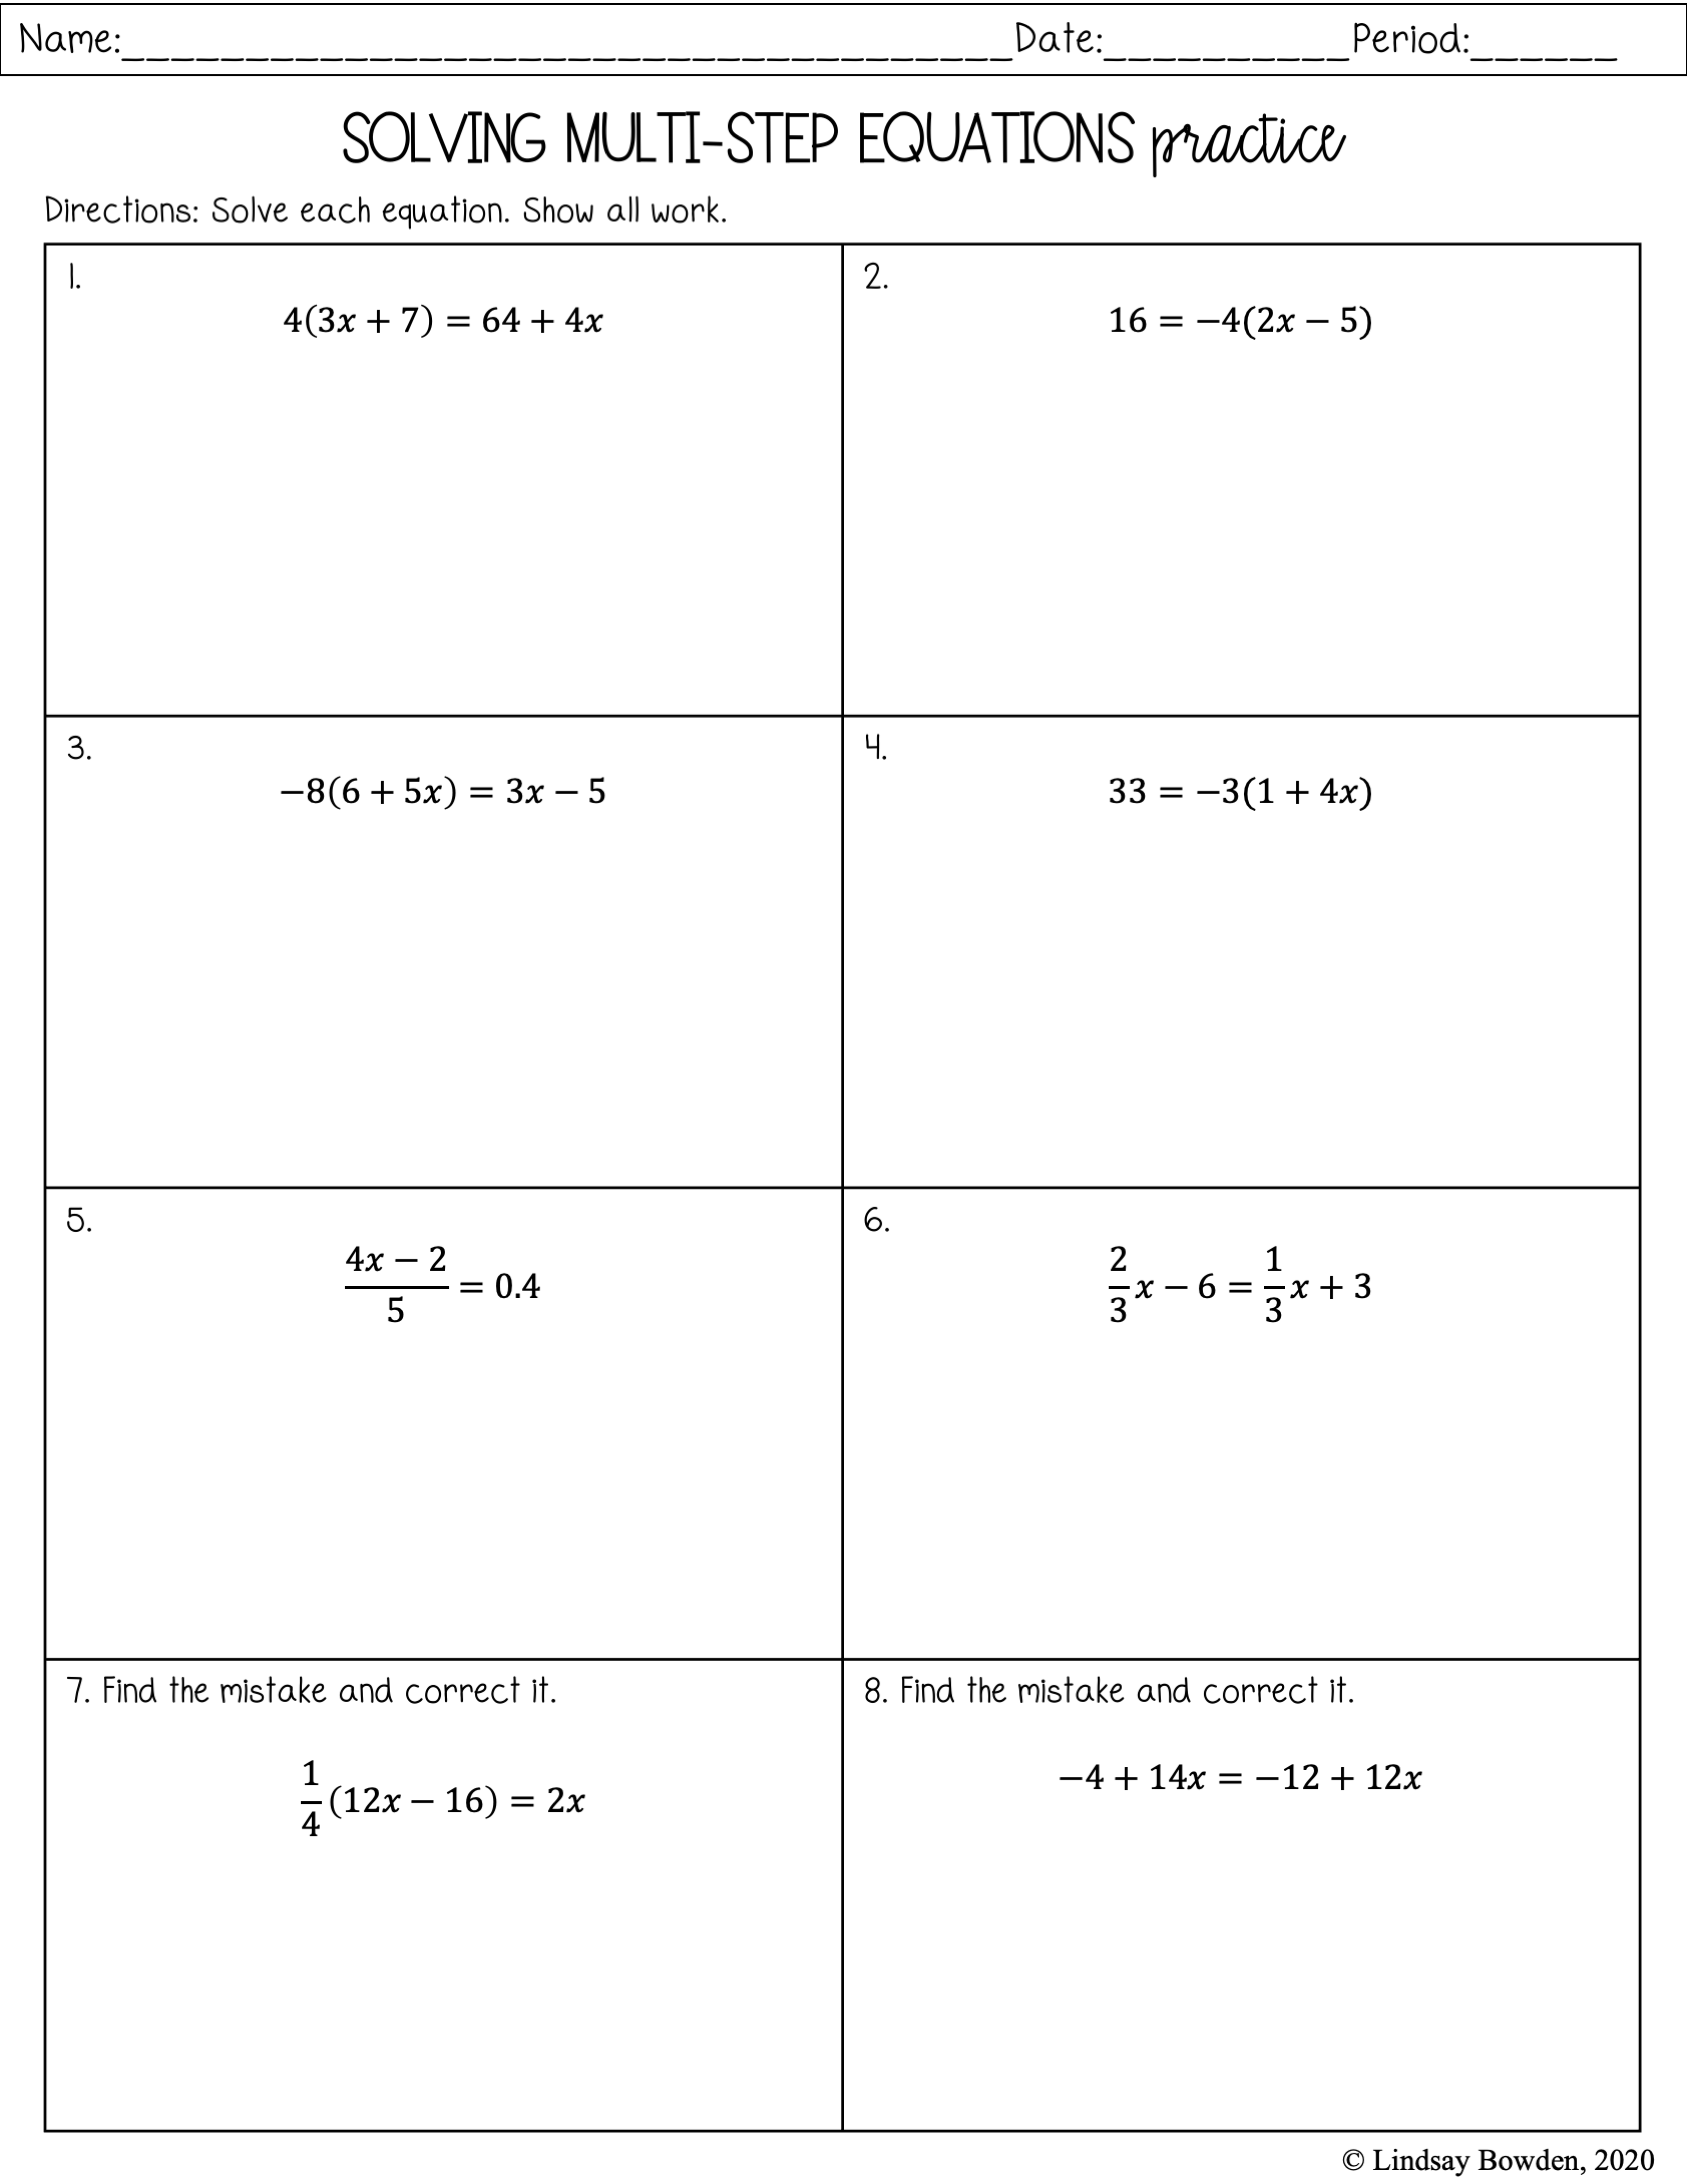 Multi-Step Equation Notes and Worksheets - Lindsay Bowden Within 2 Step Equations Worksheet